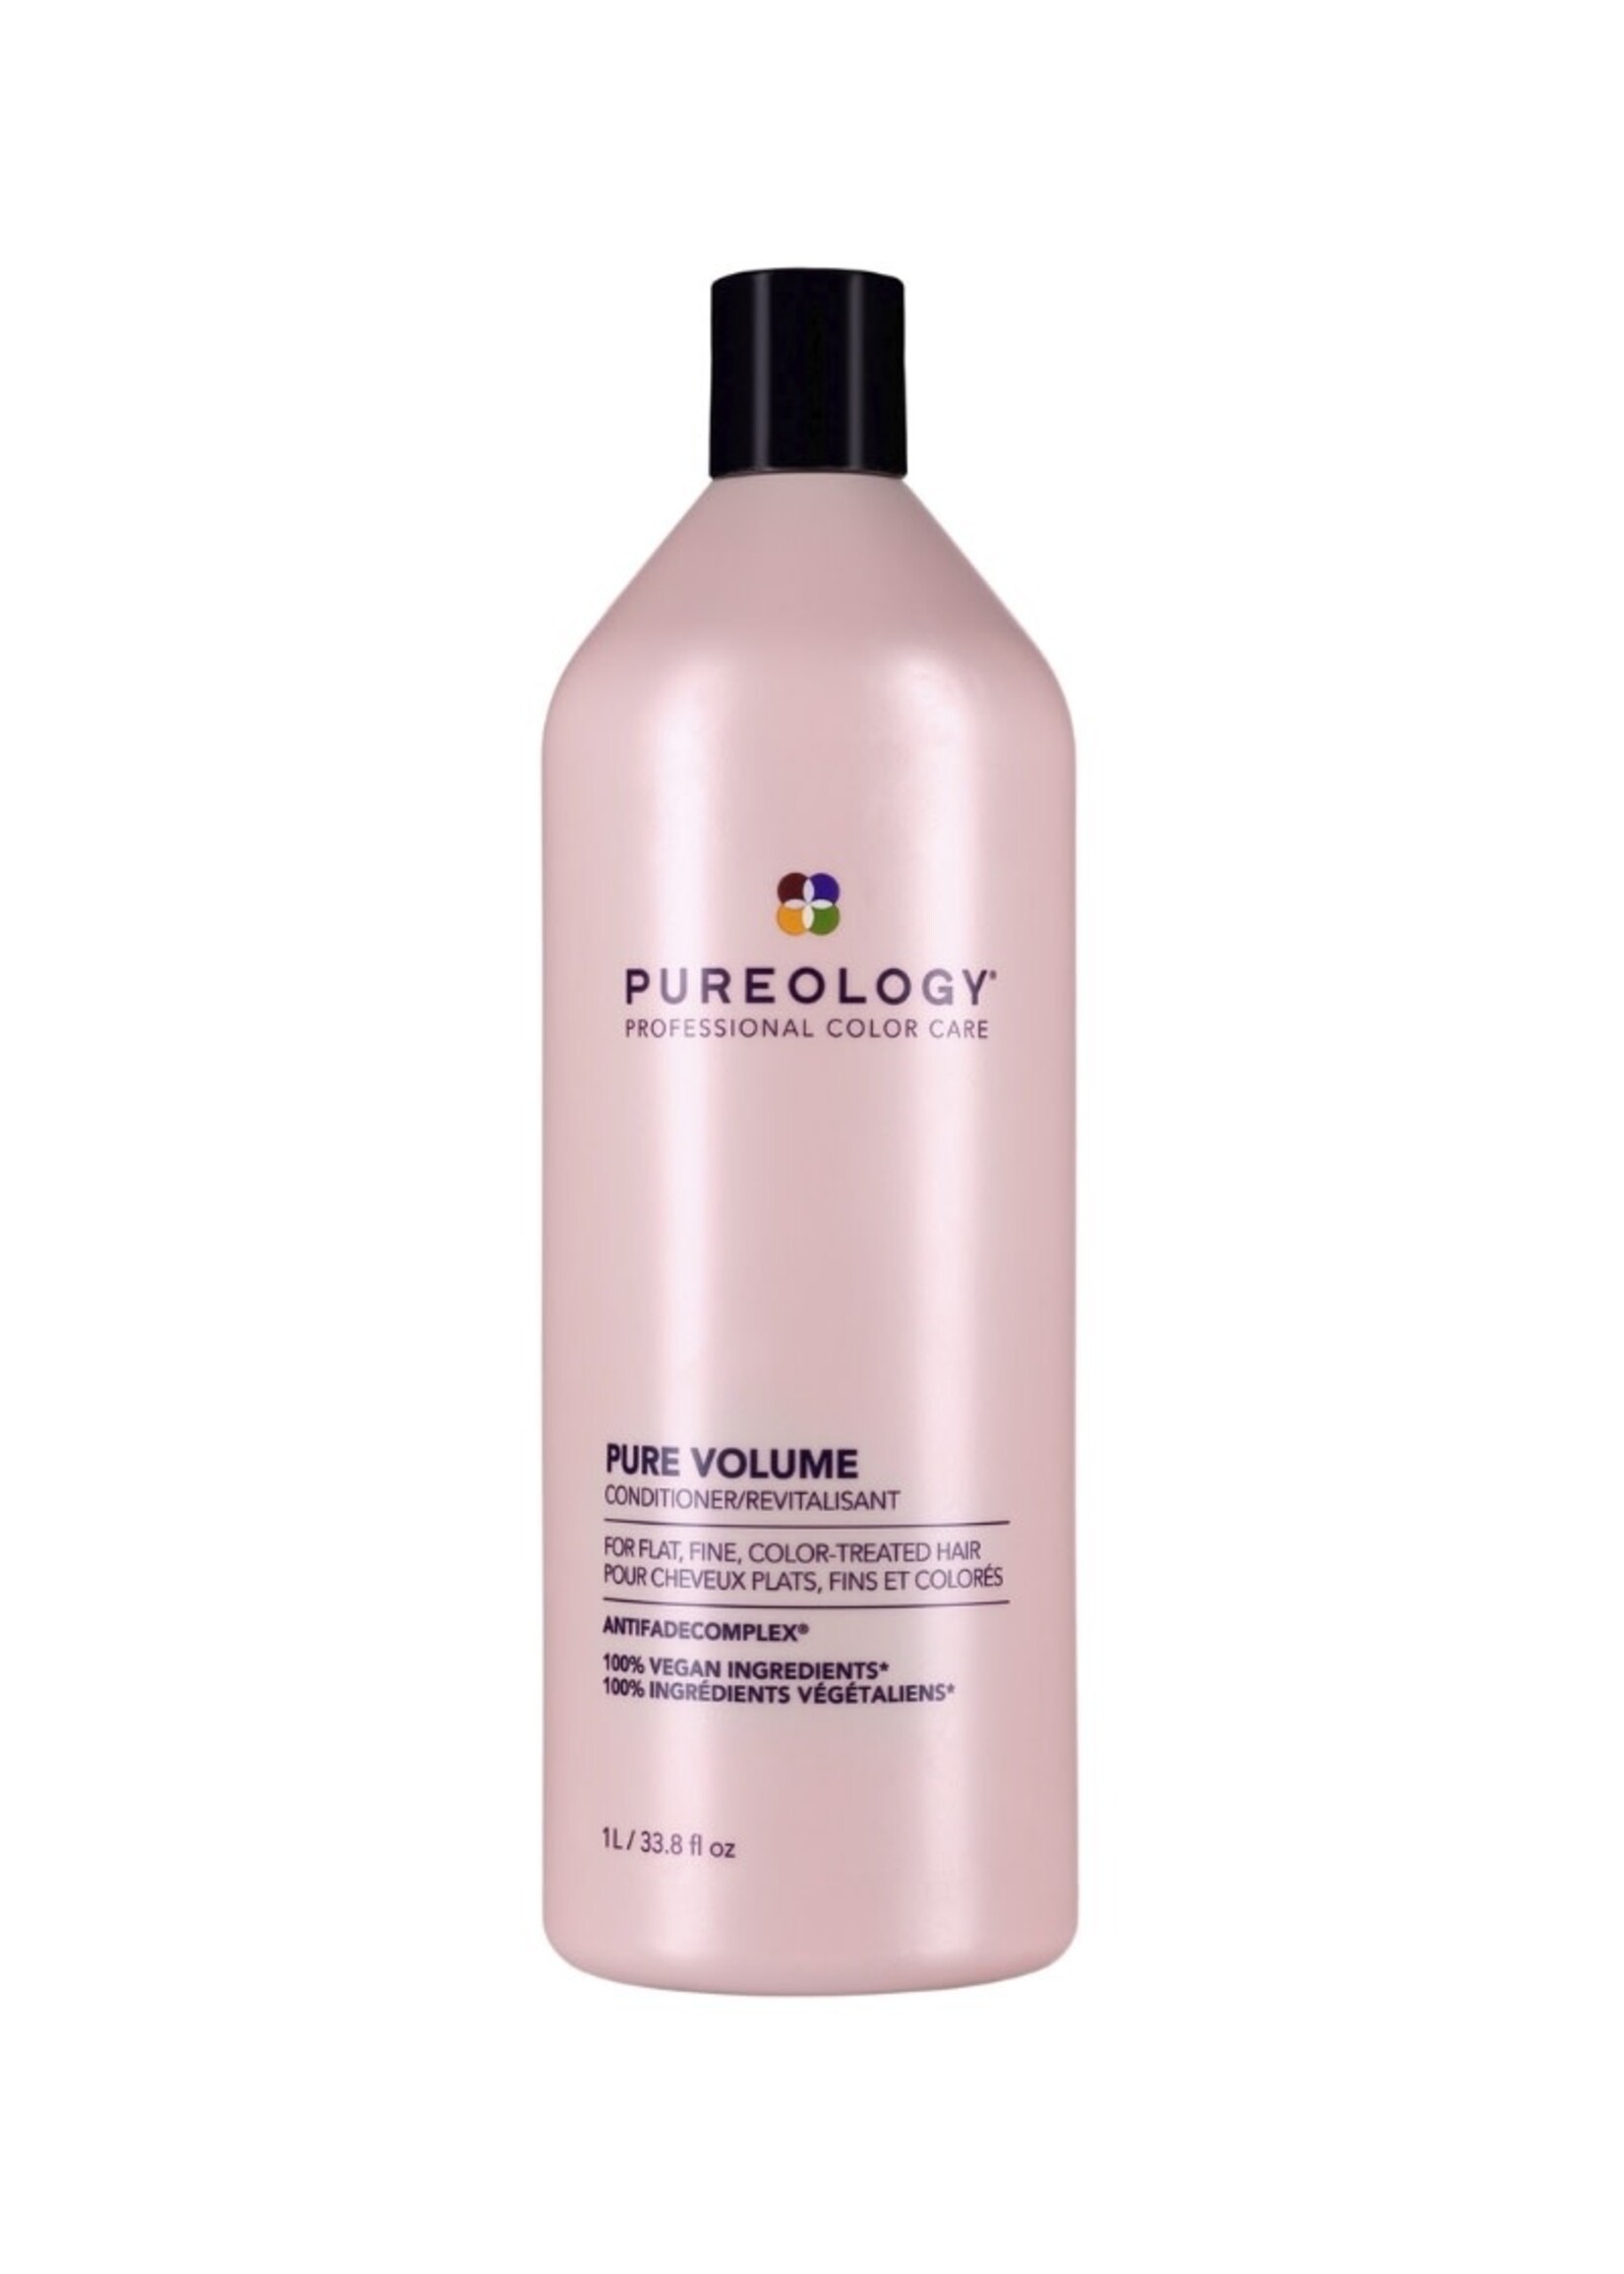 Pureology Pureology Pure Volume Conditioner 1L